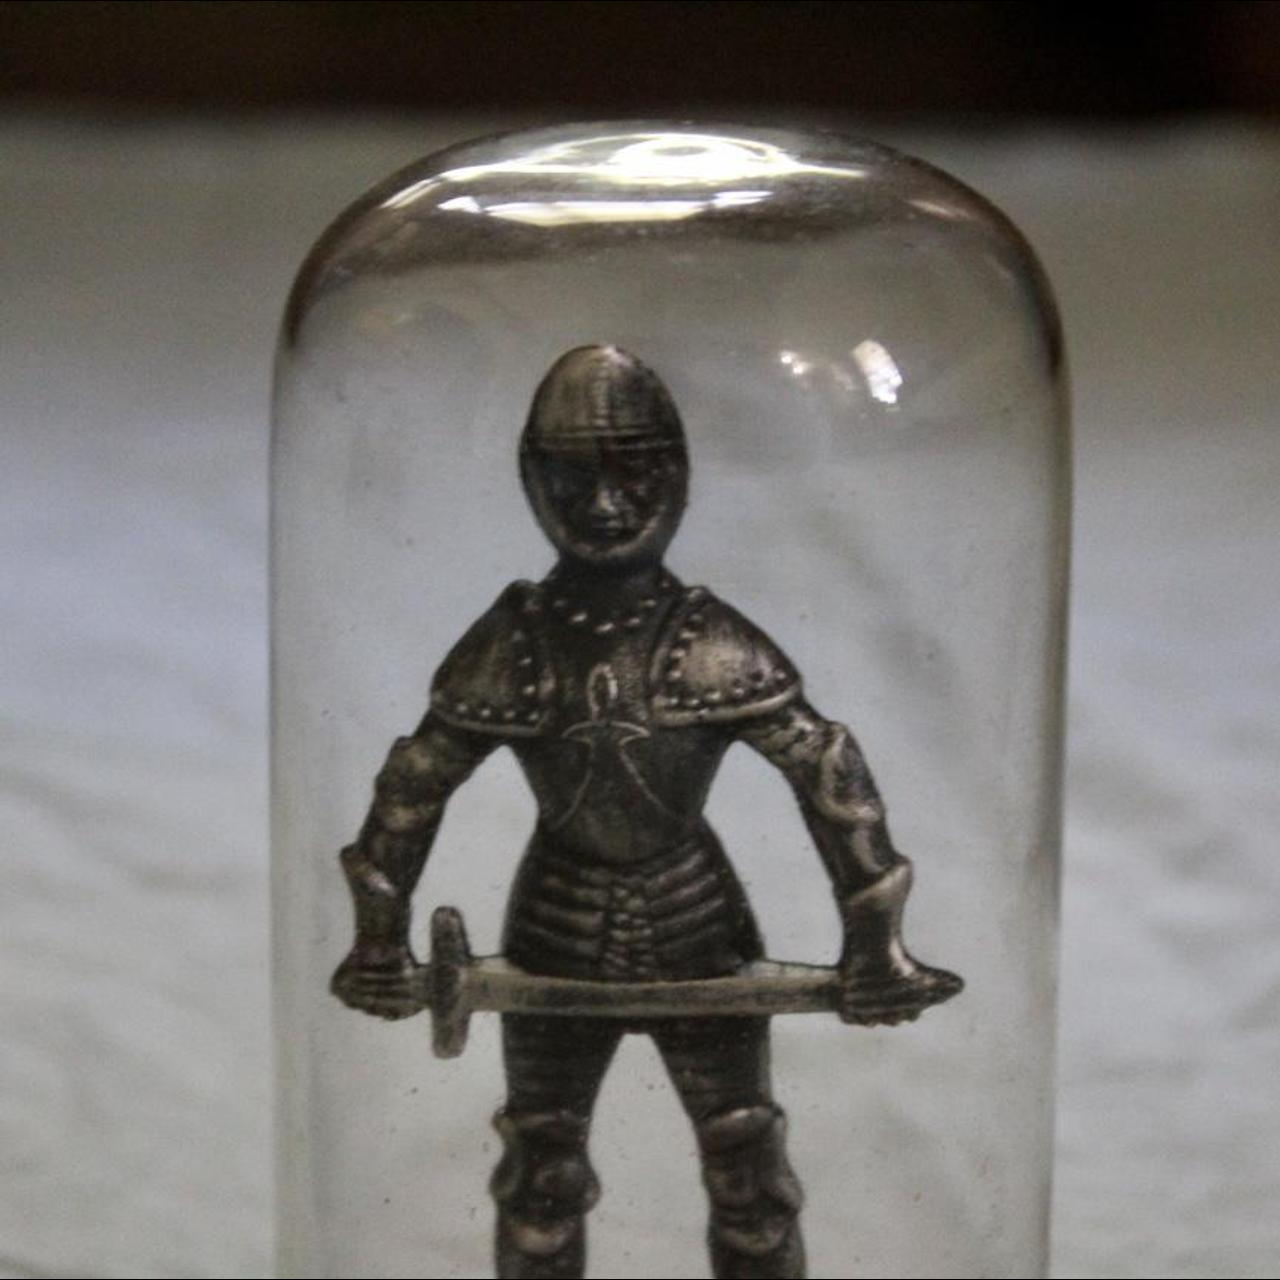 Product Image 2 - Vintage Knight in a Jar